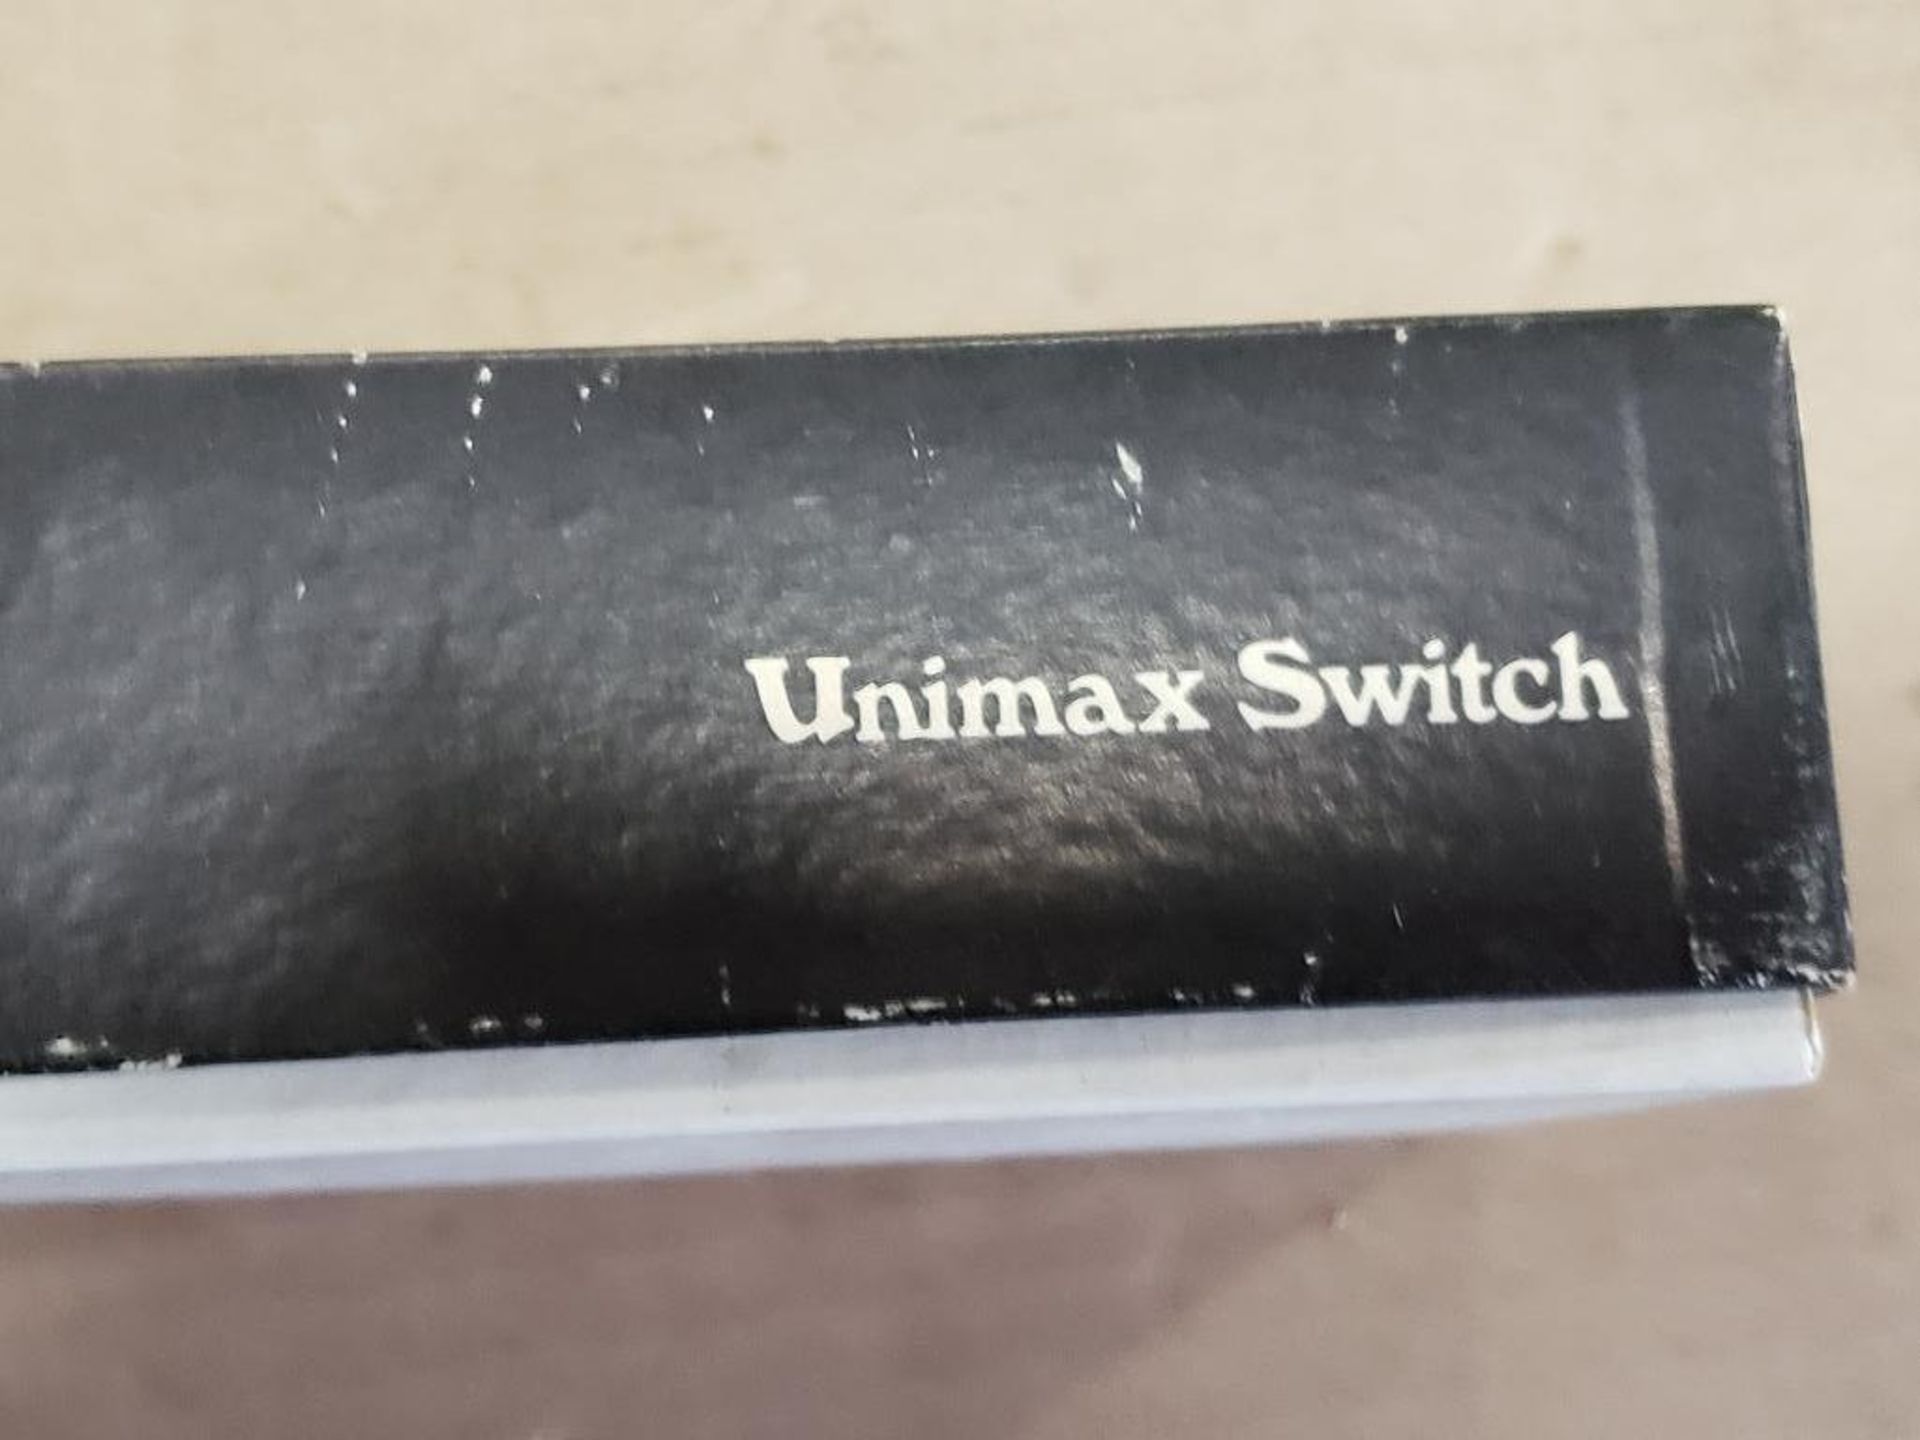 Qty 50 - Unimax Switch. 2HBT-5, 10 Count boxes. - Image 2 of 8